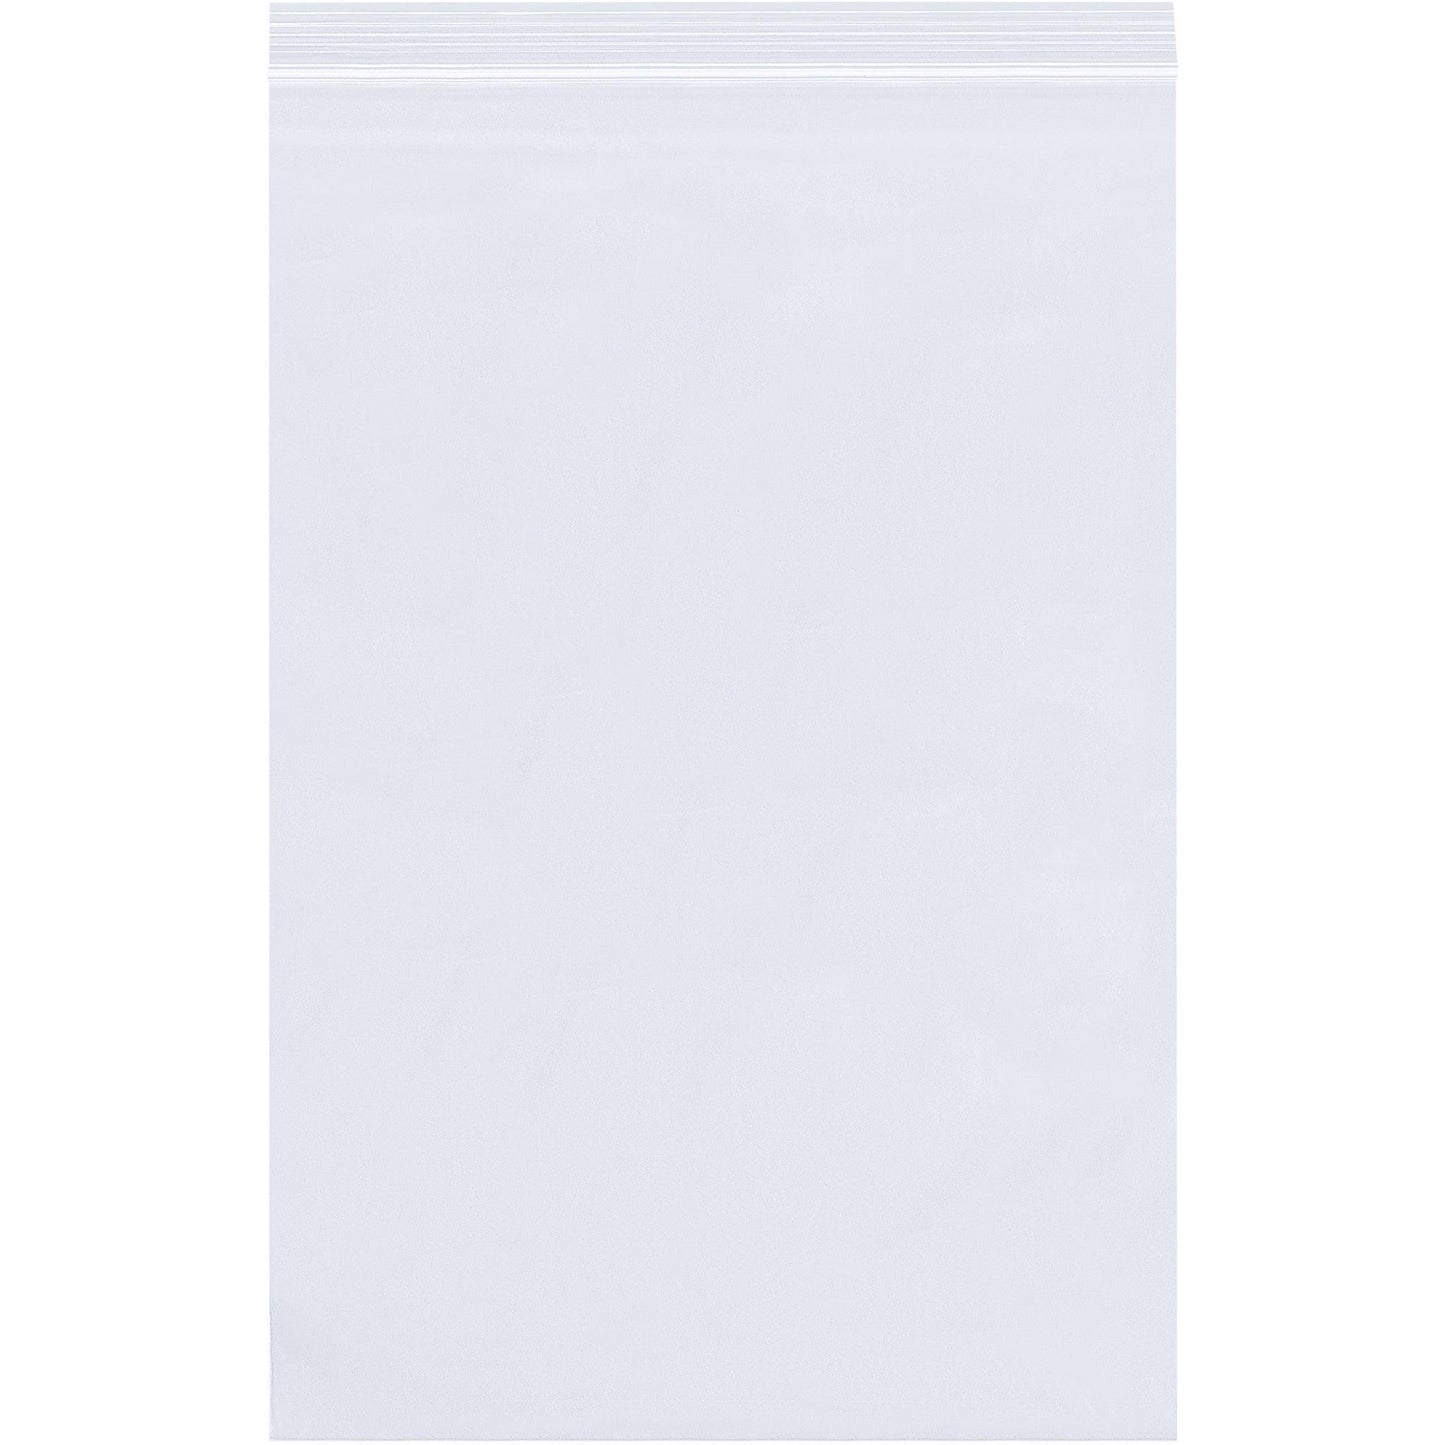 9 x 12" - (100 Pack) 4 Mil Reclosable Poly Bags - PB3765RP100